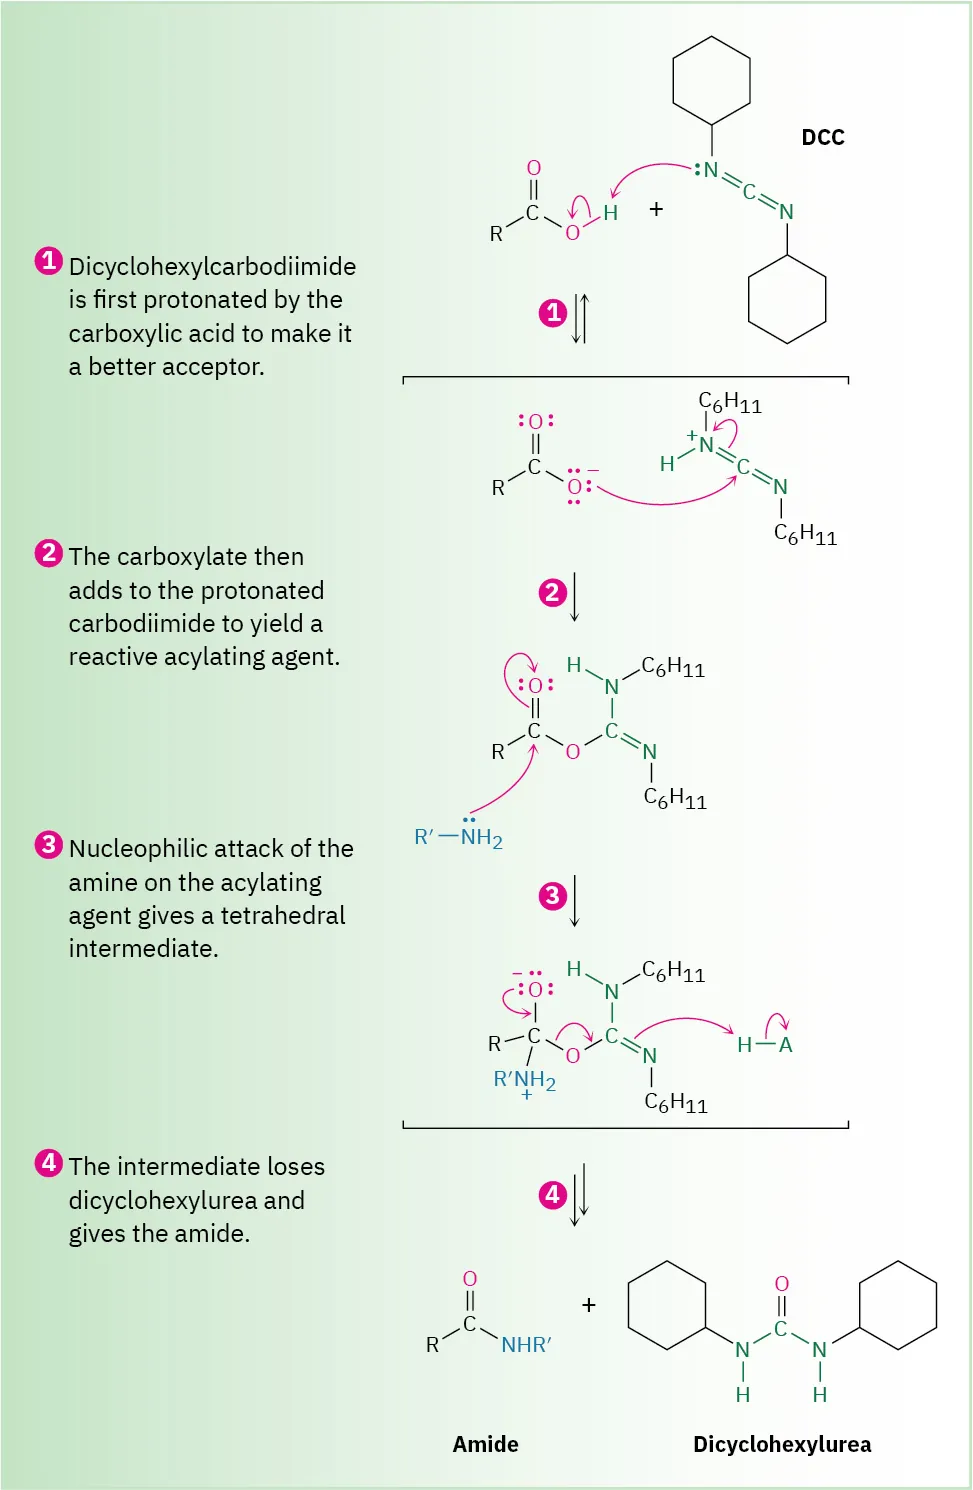 A curly arrow mechanism shows the four steps in the reaction between a carboxylic acid and dicyclohexylcarbodiimide (D C C) to form an amide and dicyclohexylurea.